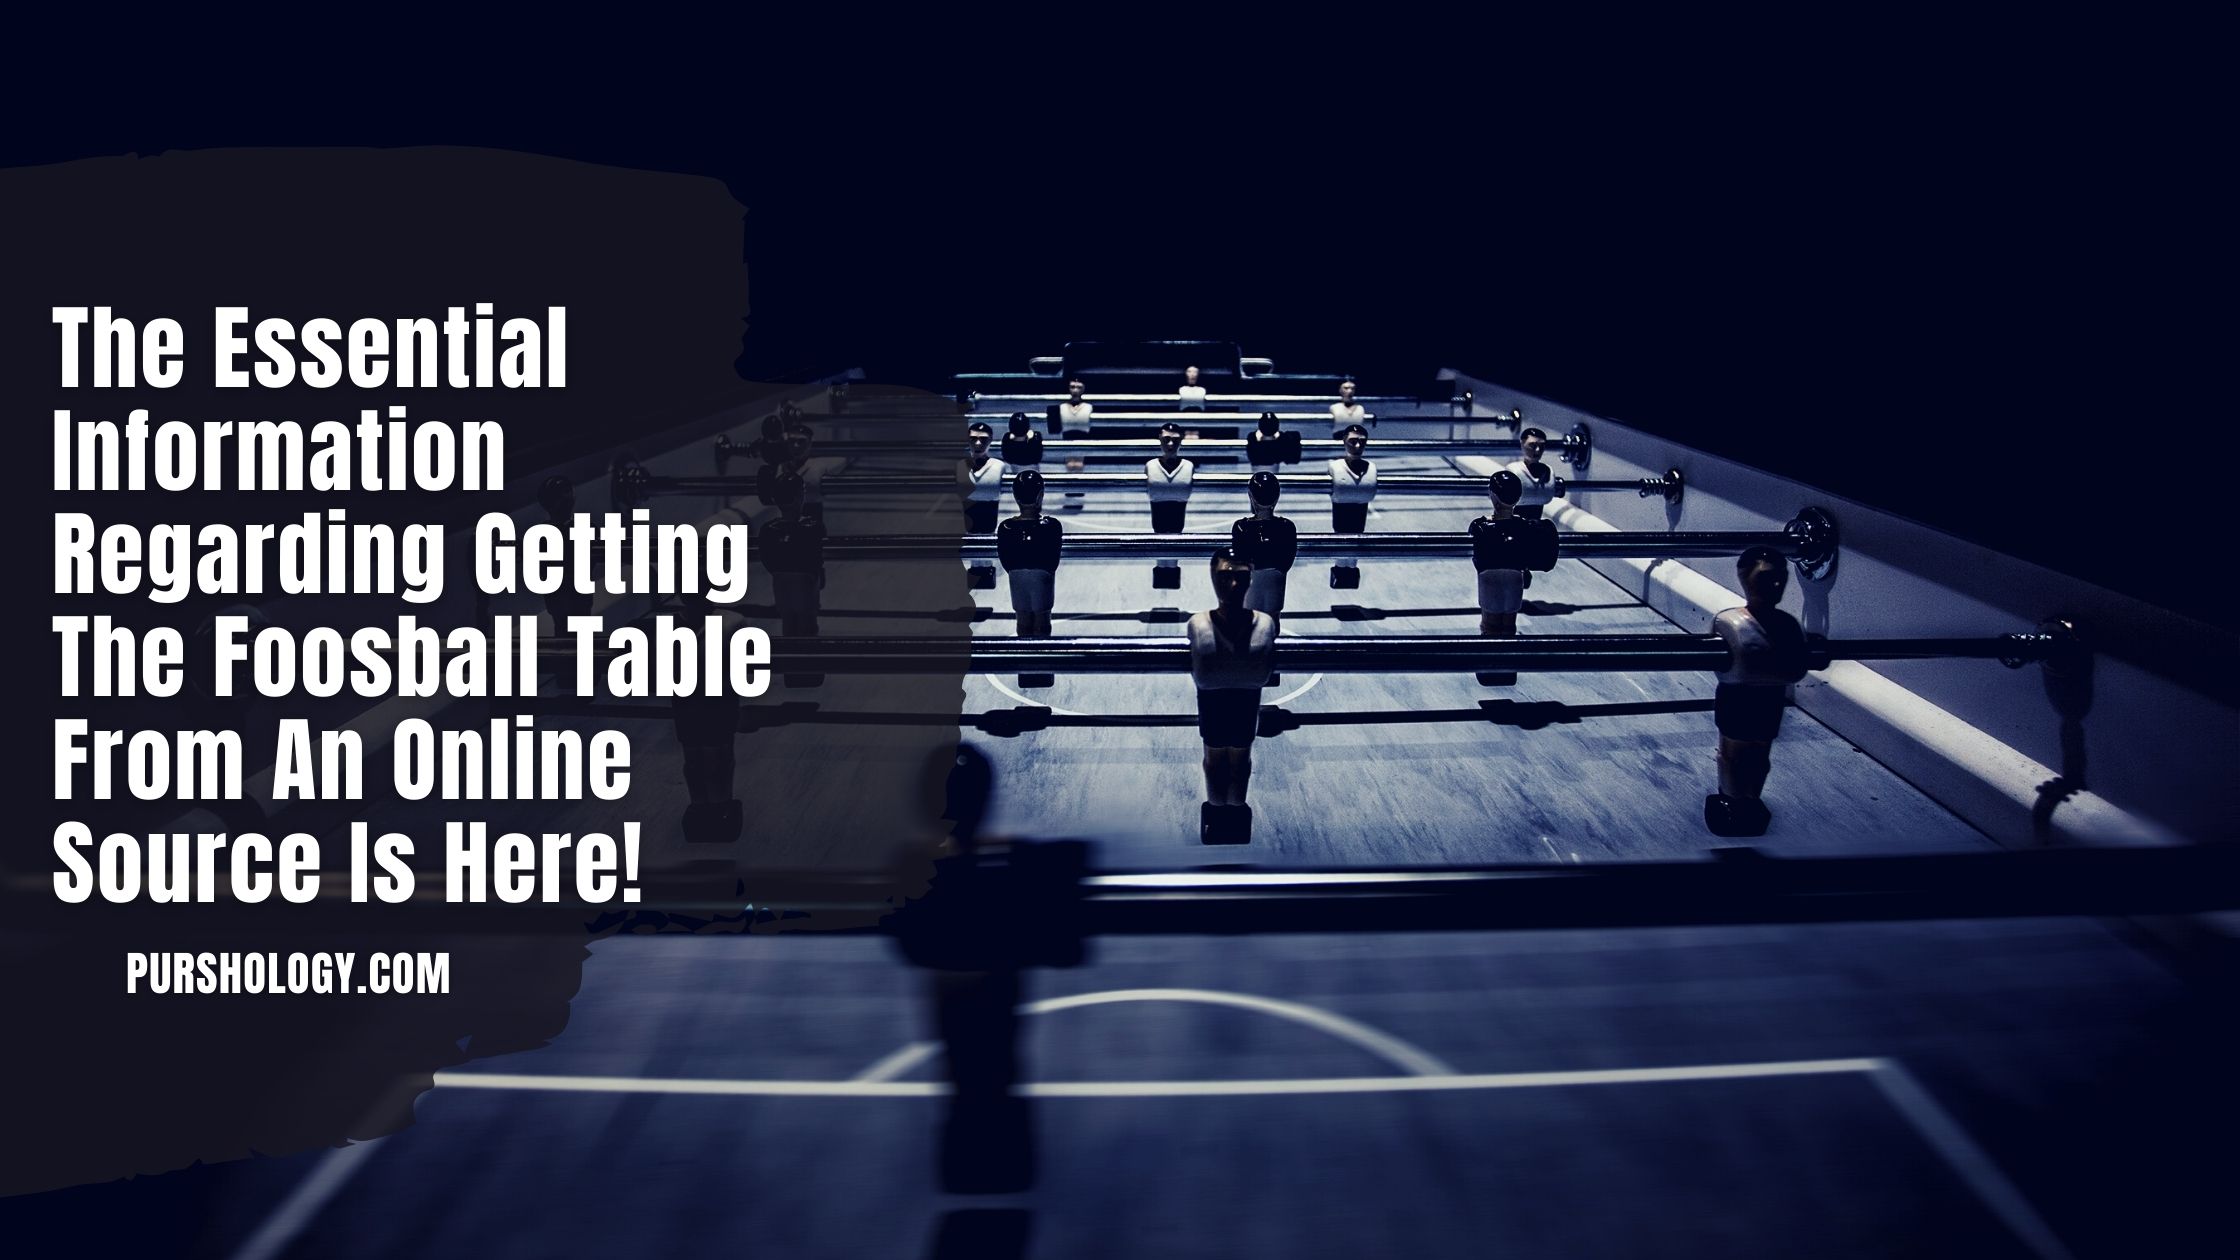 The Essential Information Regarding Getting The Foosball Table From An Online Source Is Here